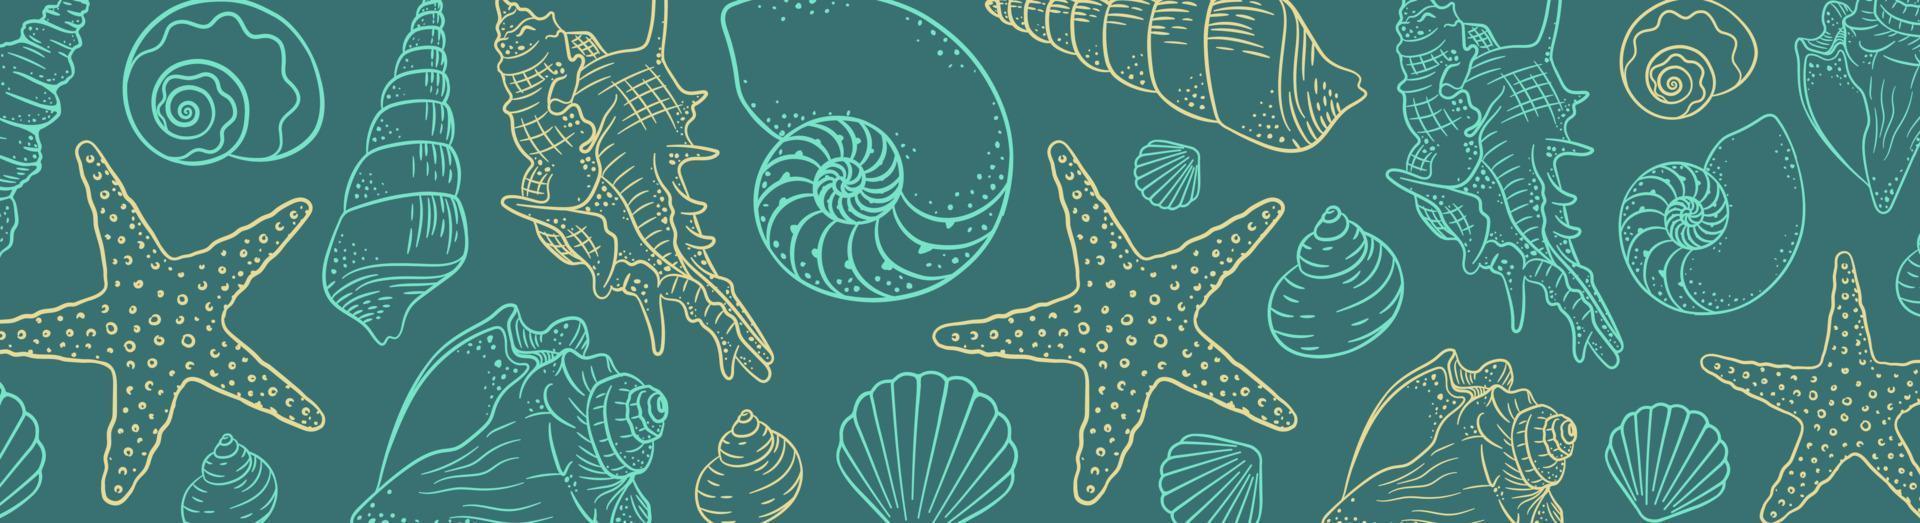 Summer time horizontal banner background. Hand drawn sea shells and stars collection. Marine illustration of ocean shellfish vector